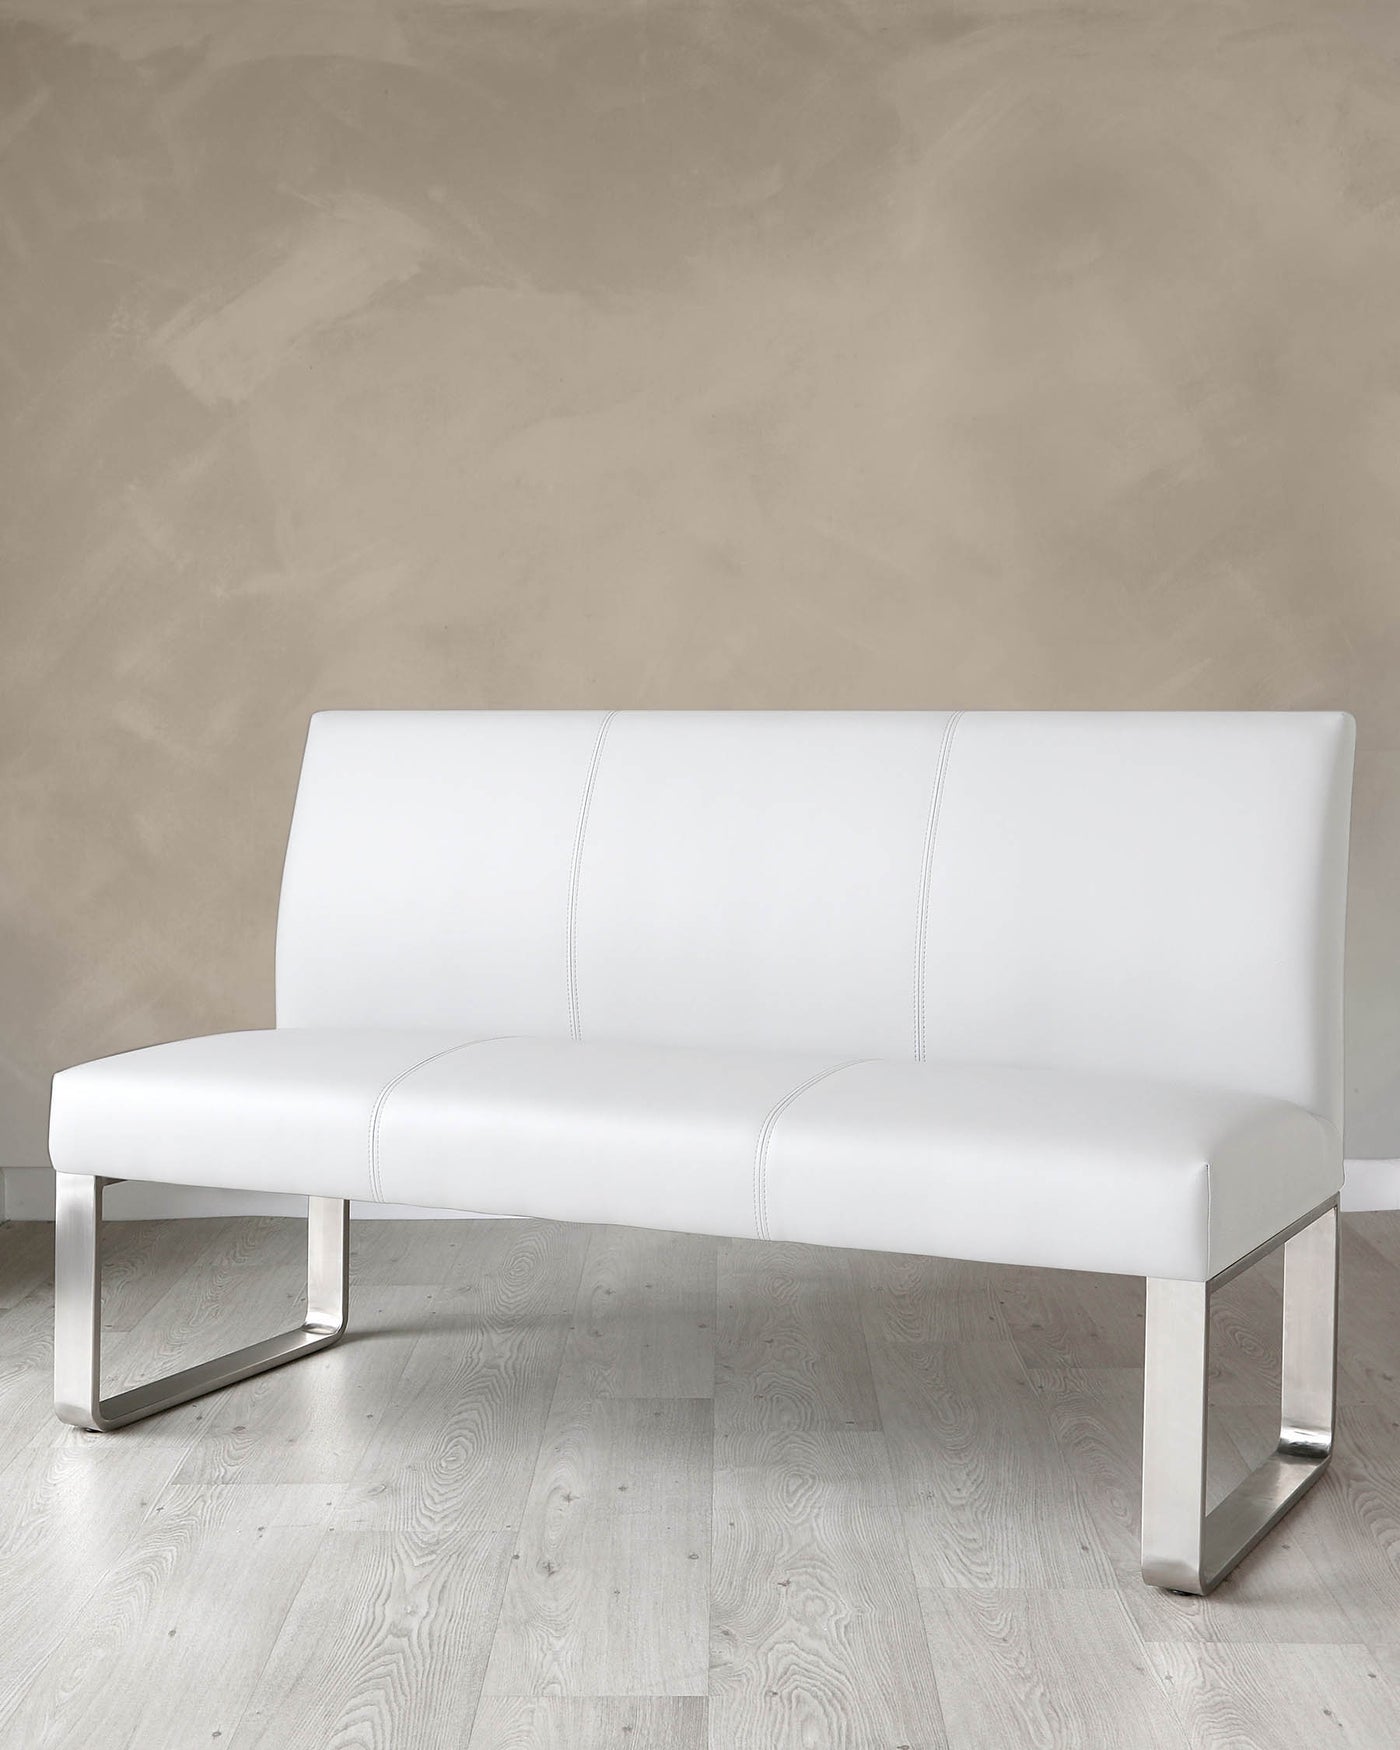 Modern white faux leather bench with a sleek, minimalist design featuring a straight backrest, cushioned seat with subtle stitching details, and shiny metallic U-shaped legs.